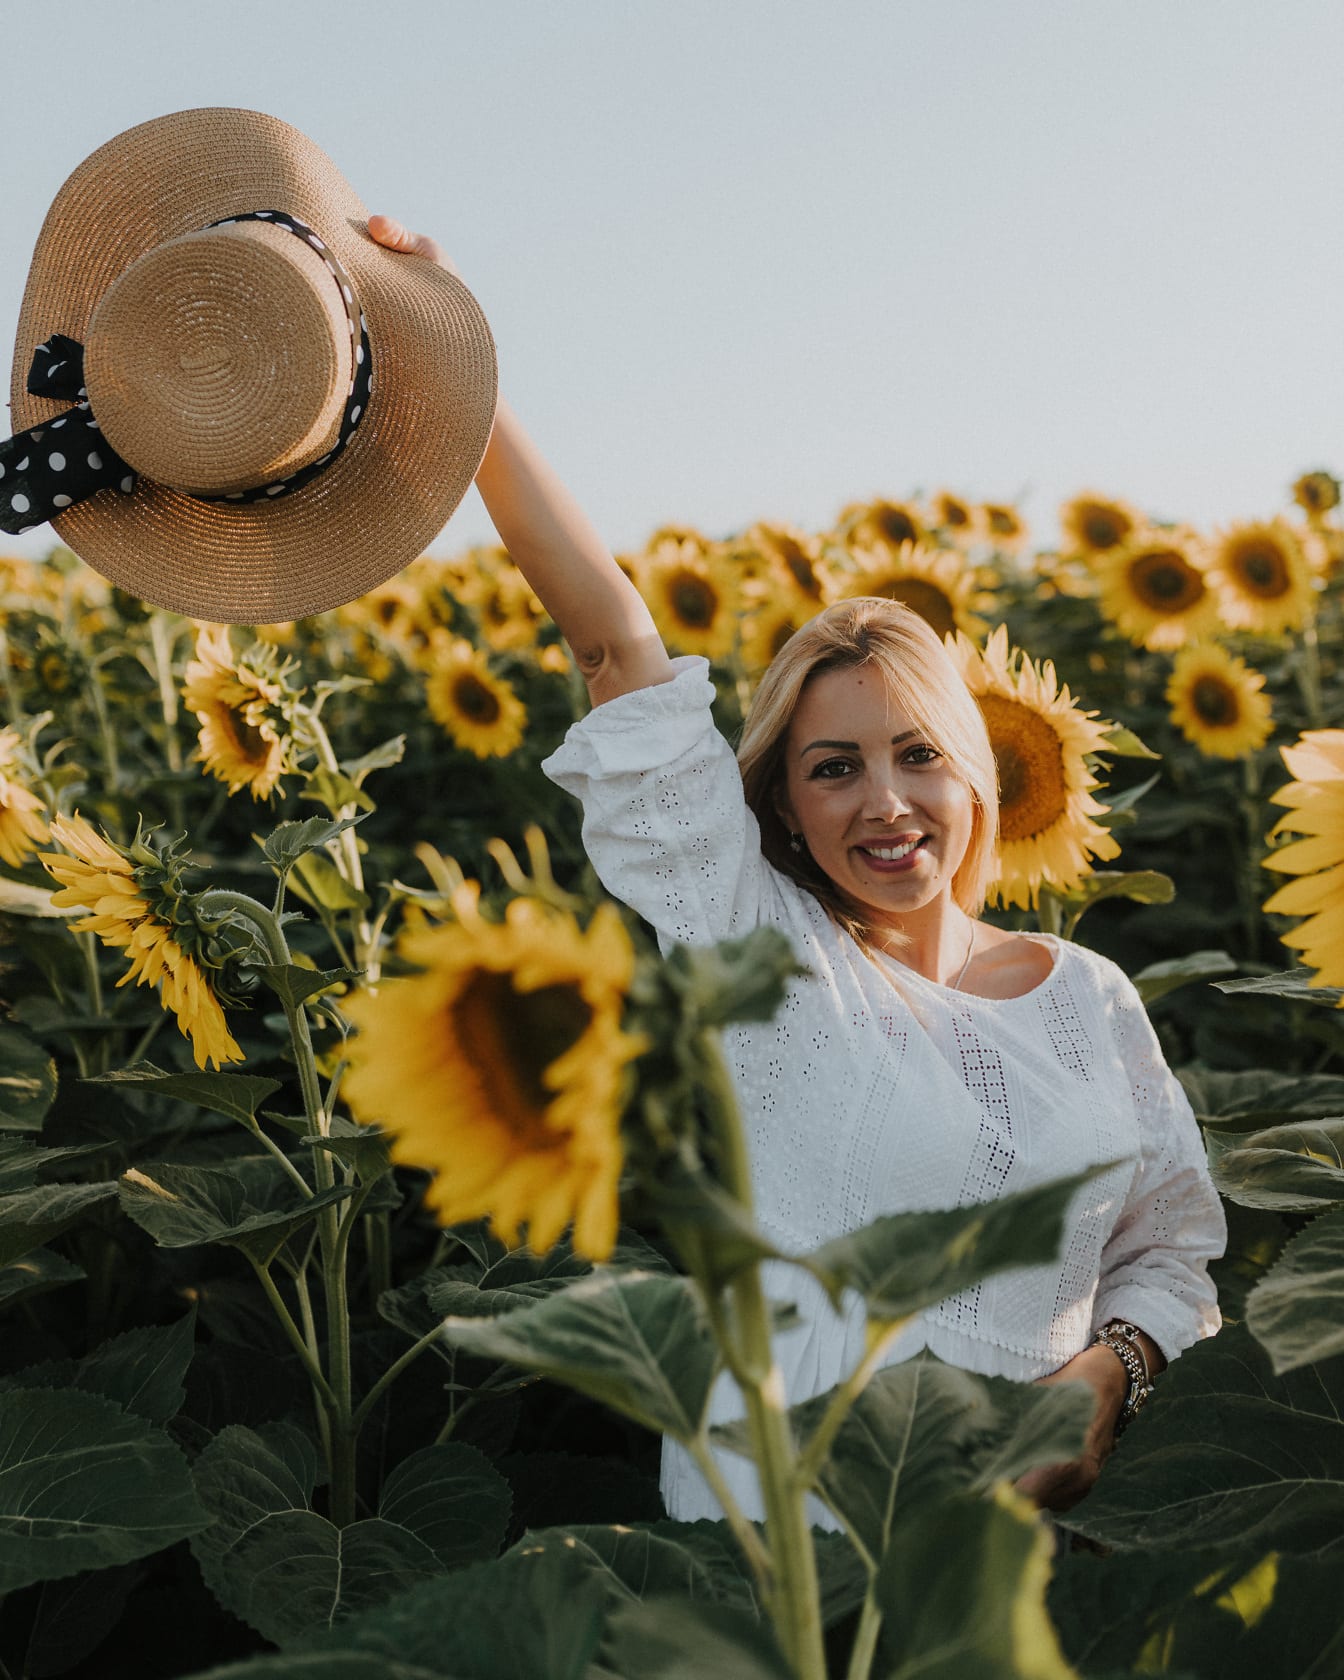 Gorgeous blonde smiling in sunflower field with straw hat in hand